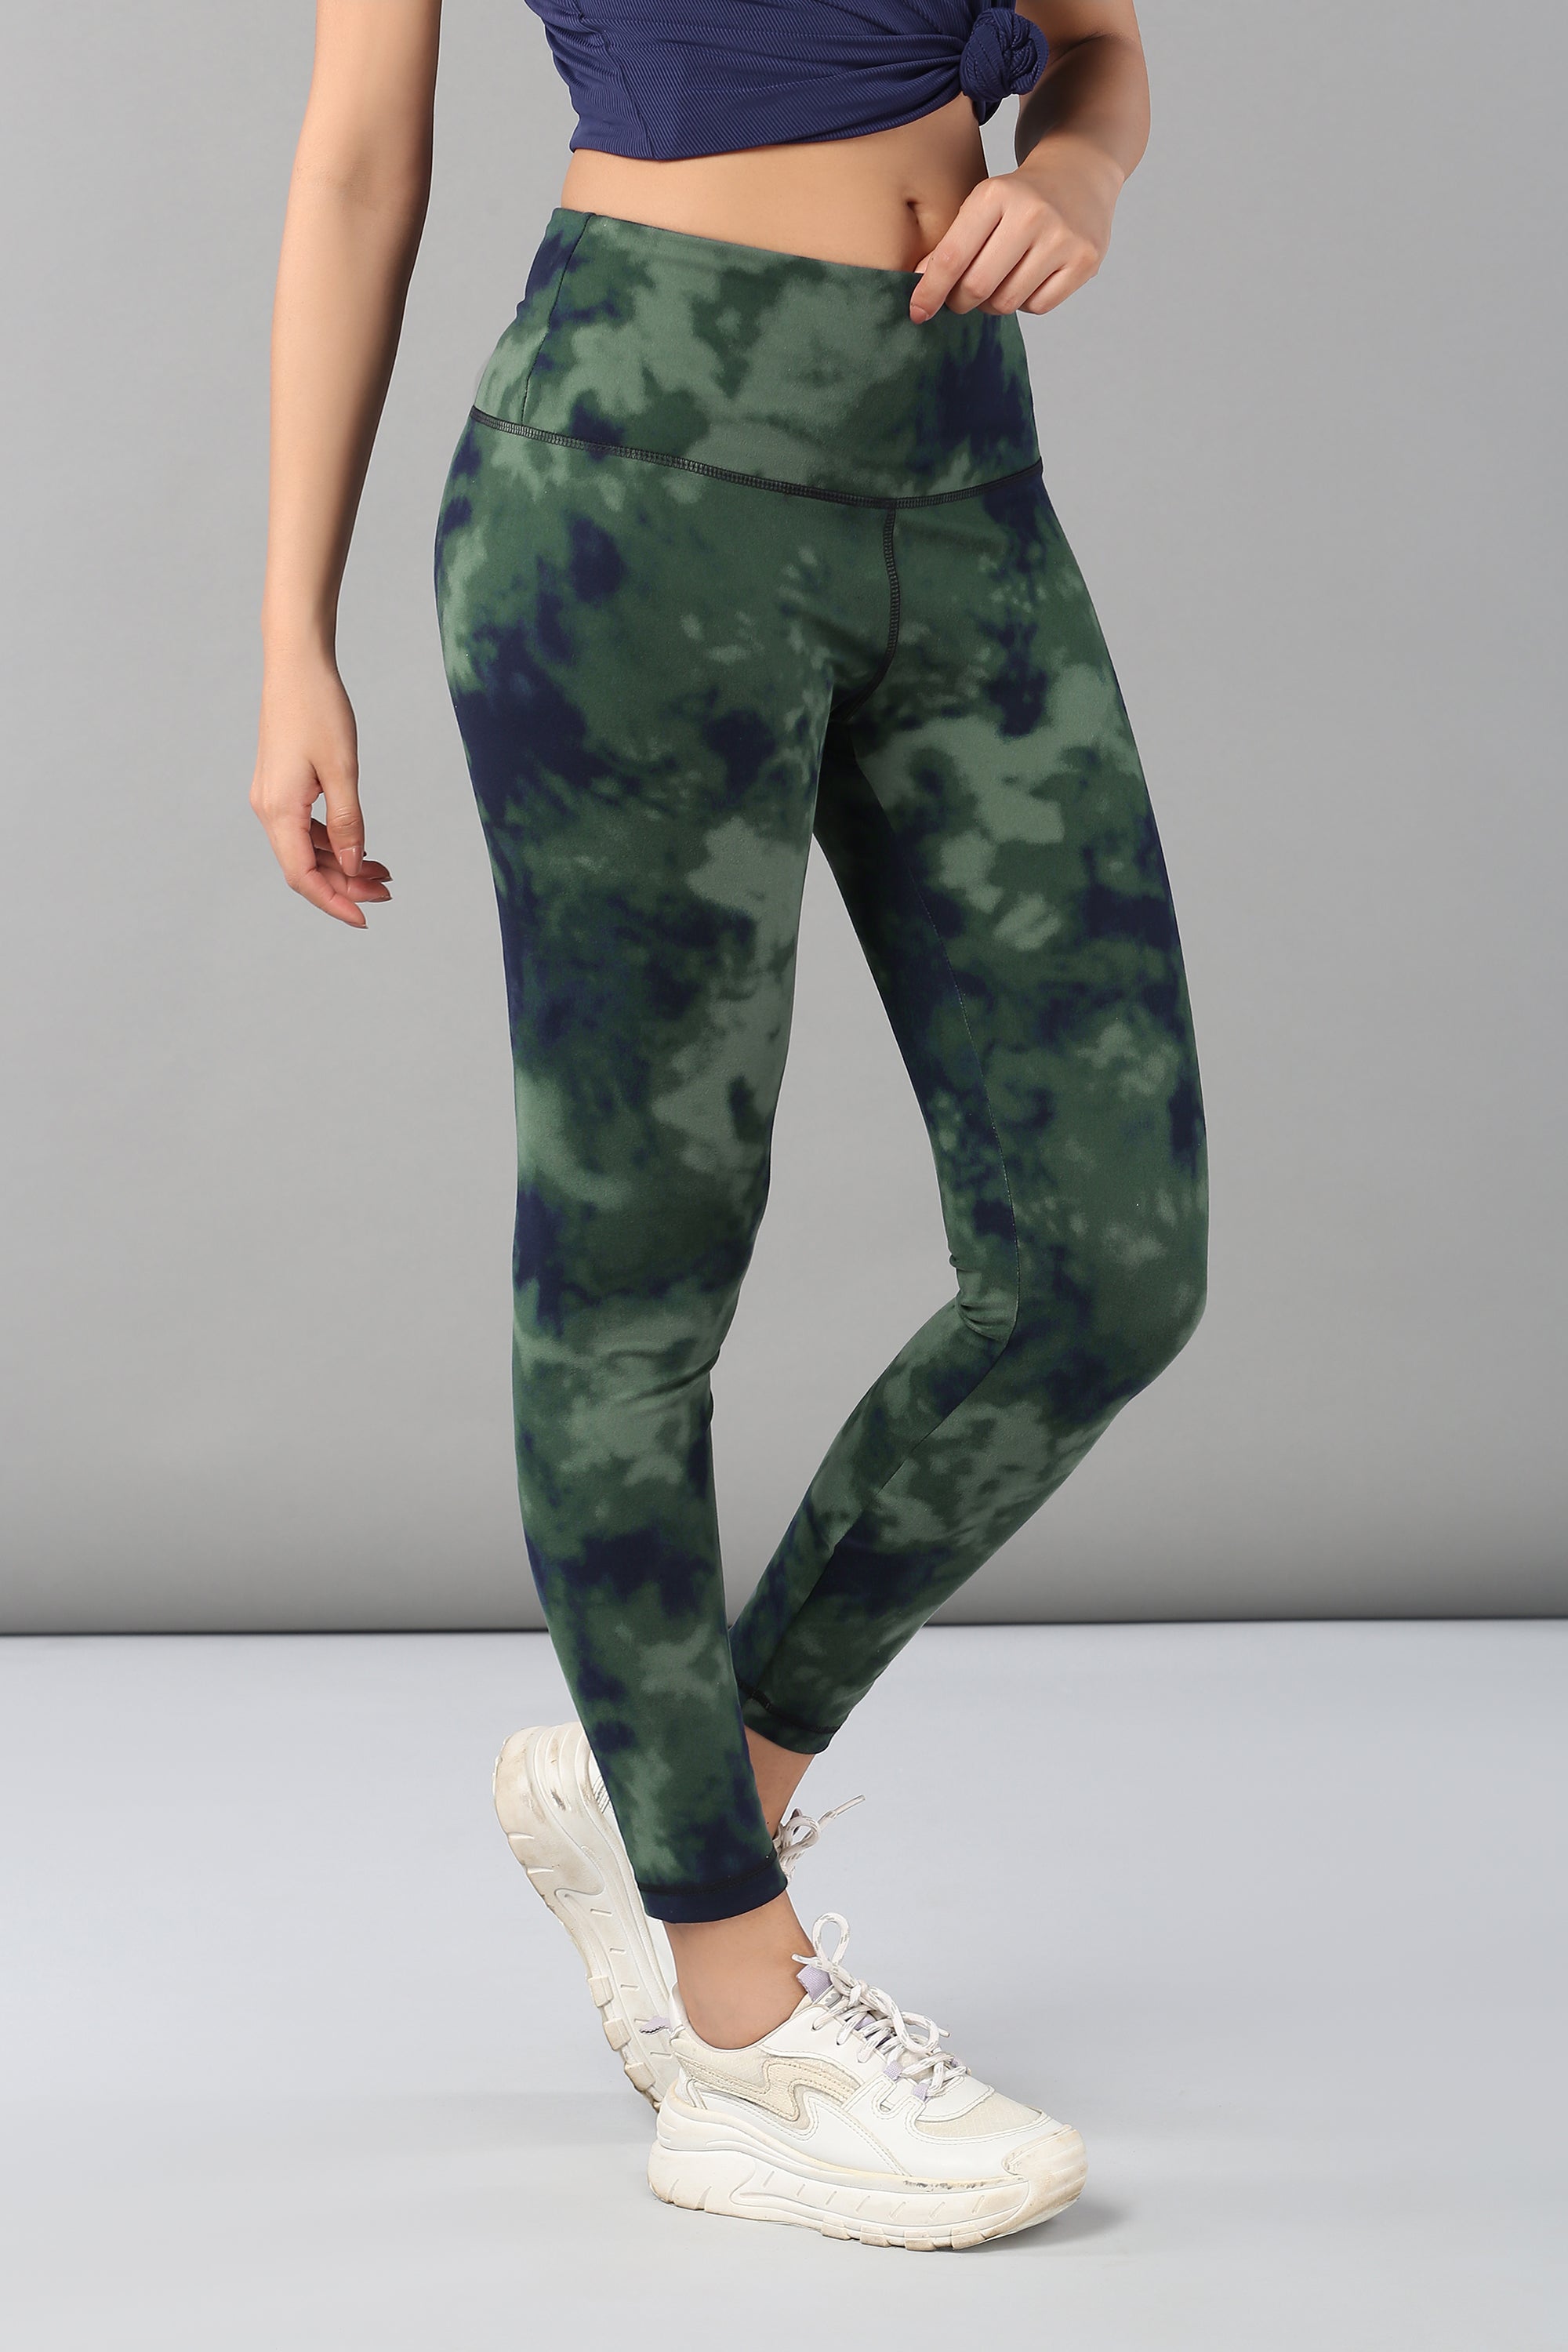 DKNY Tie-dyed Stretch leggings in Green